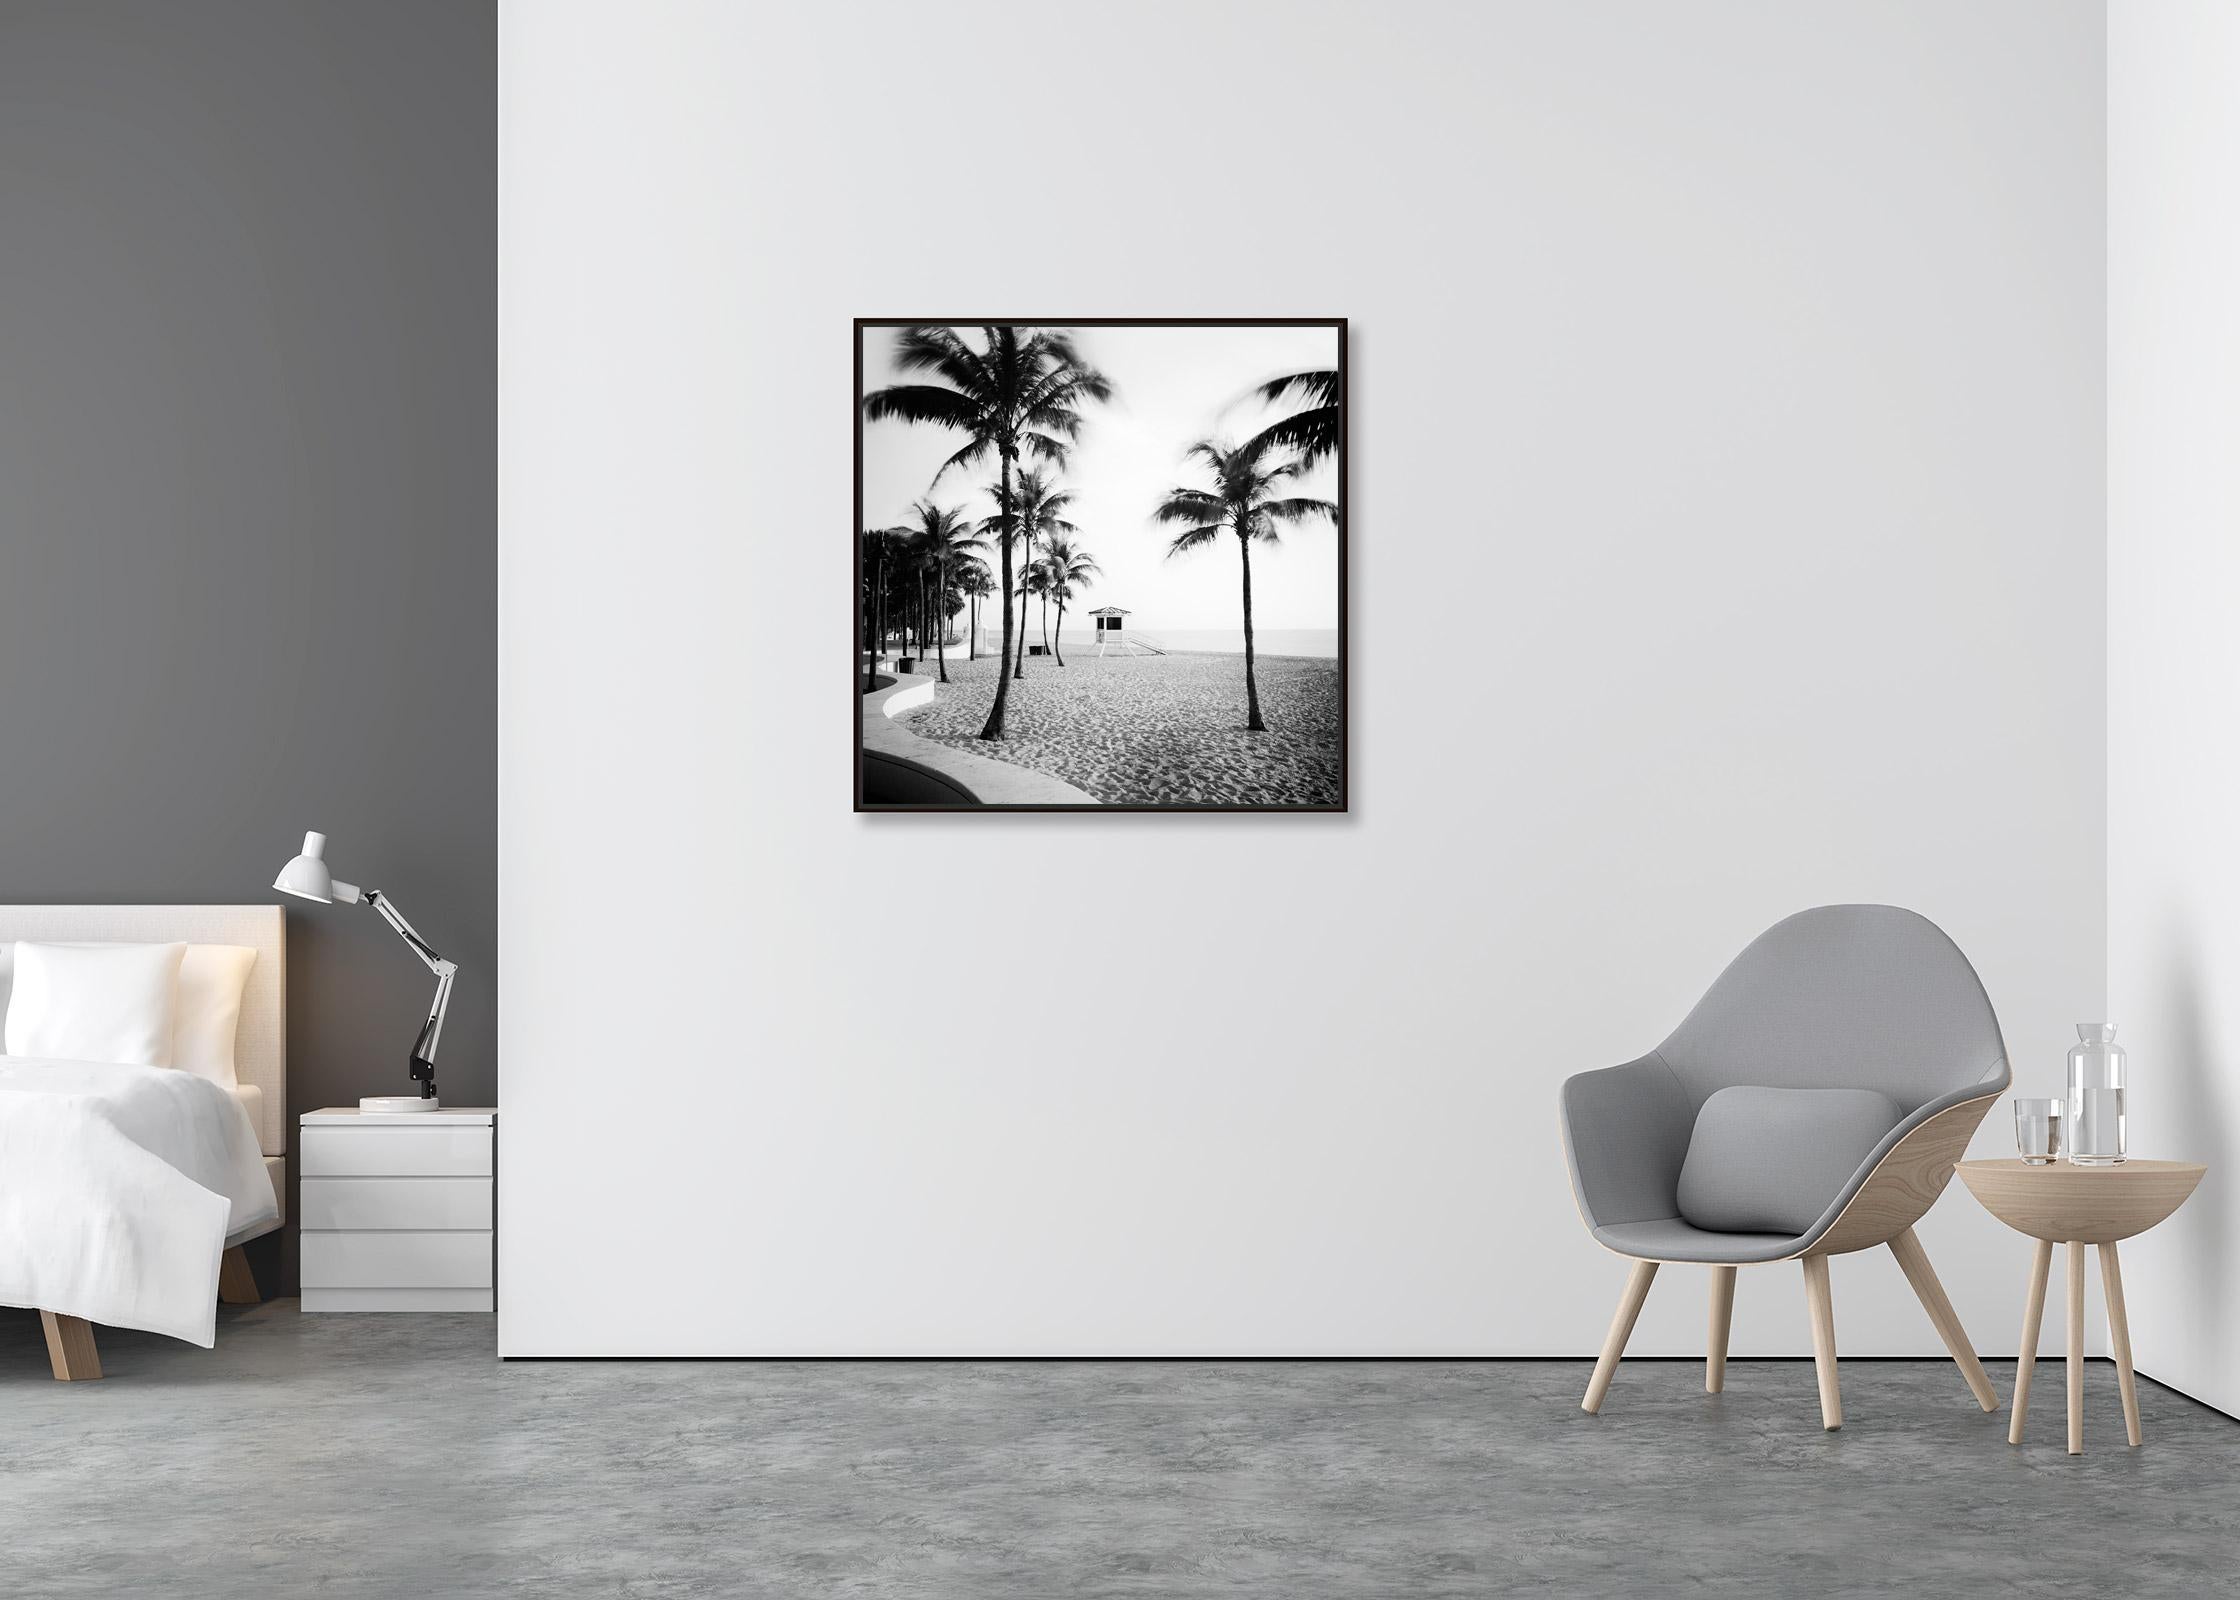 Fort Lauderdale Beach Palm Trees Florida black and white landscape photography - Contemporary Photograph by Gerald Berghammer